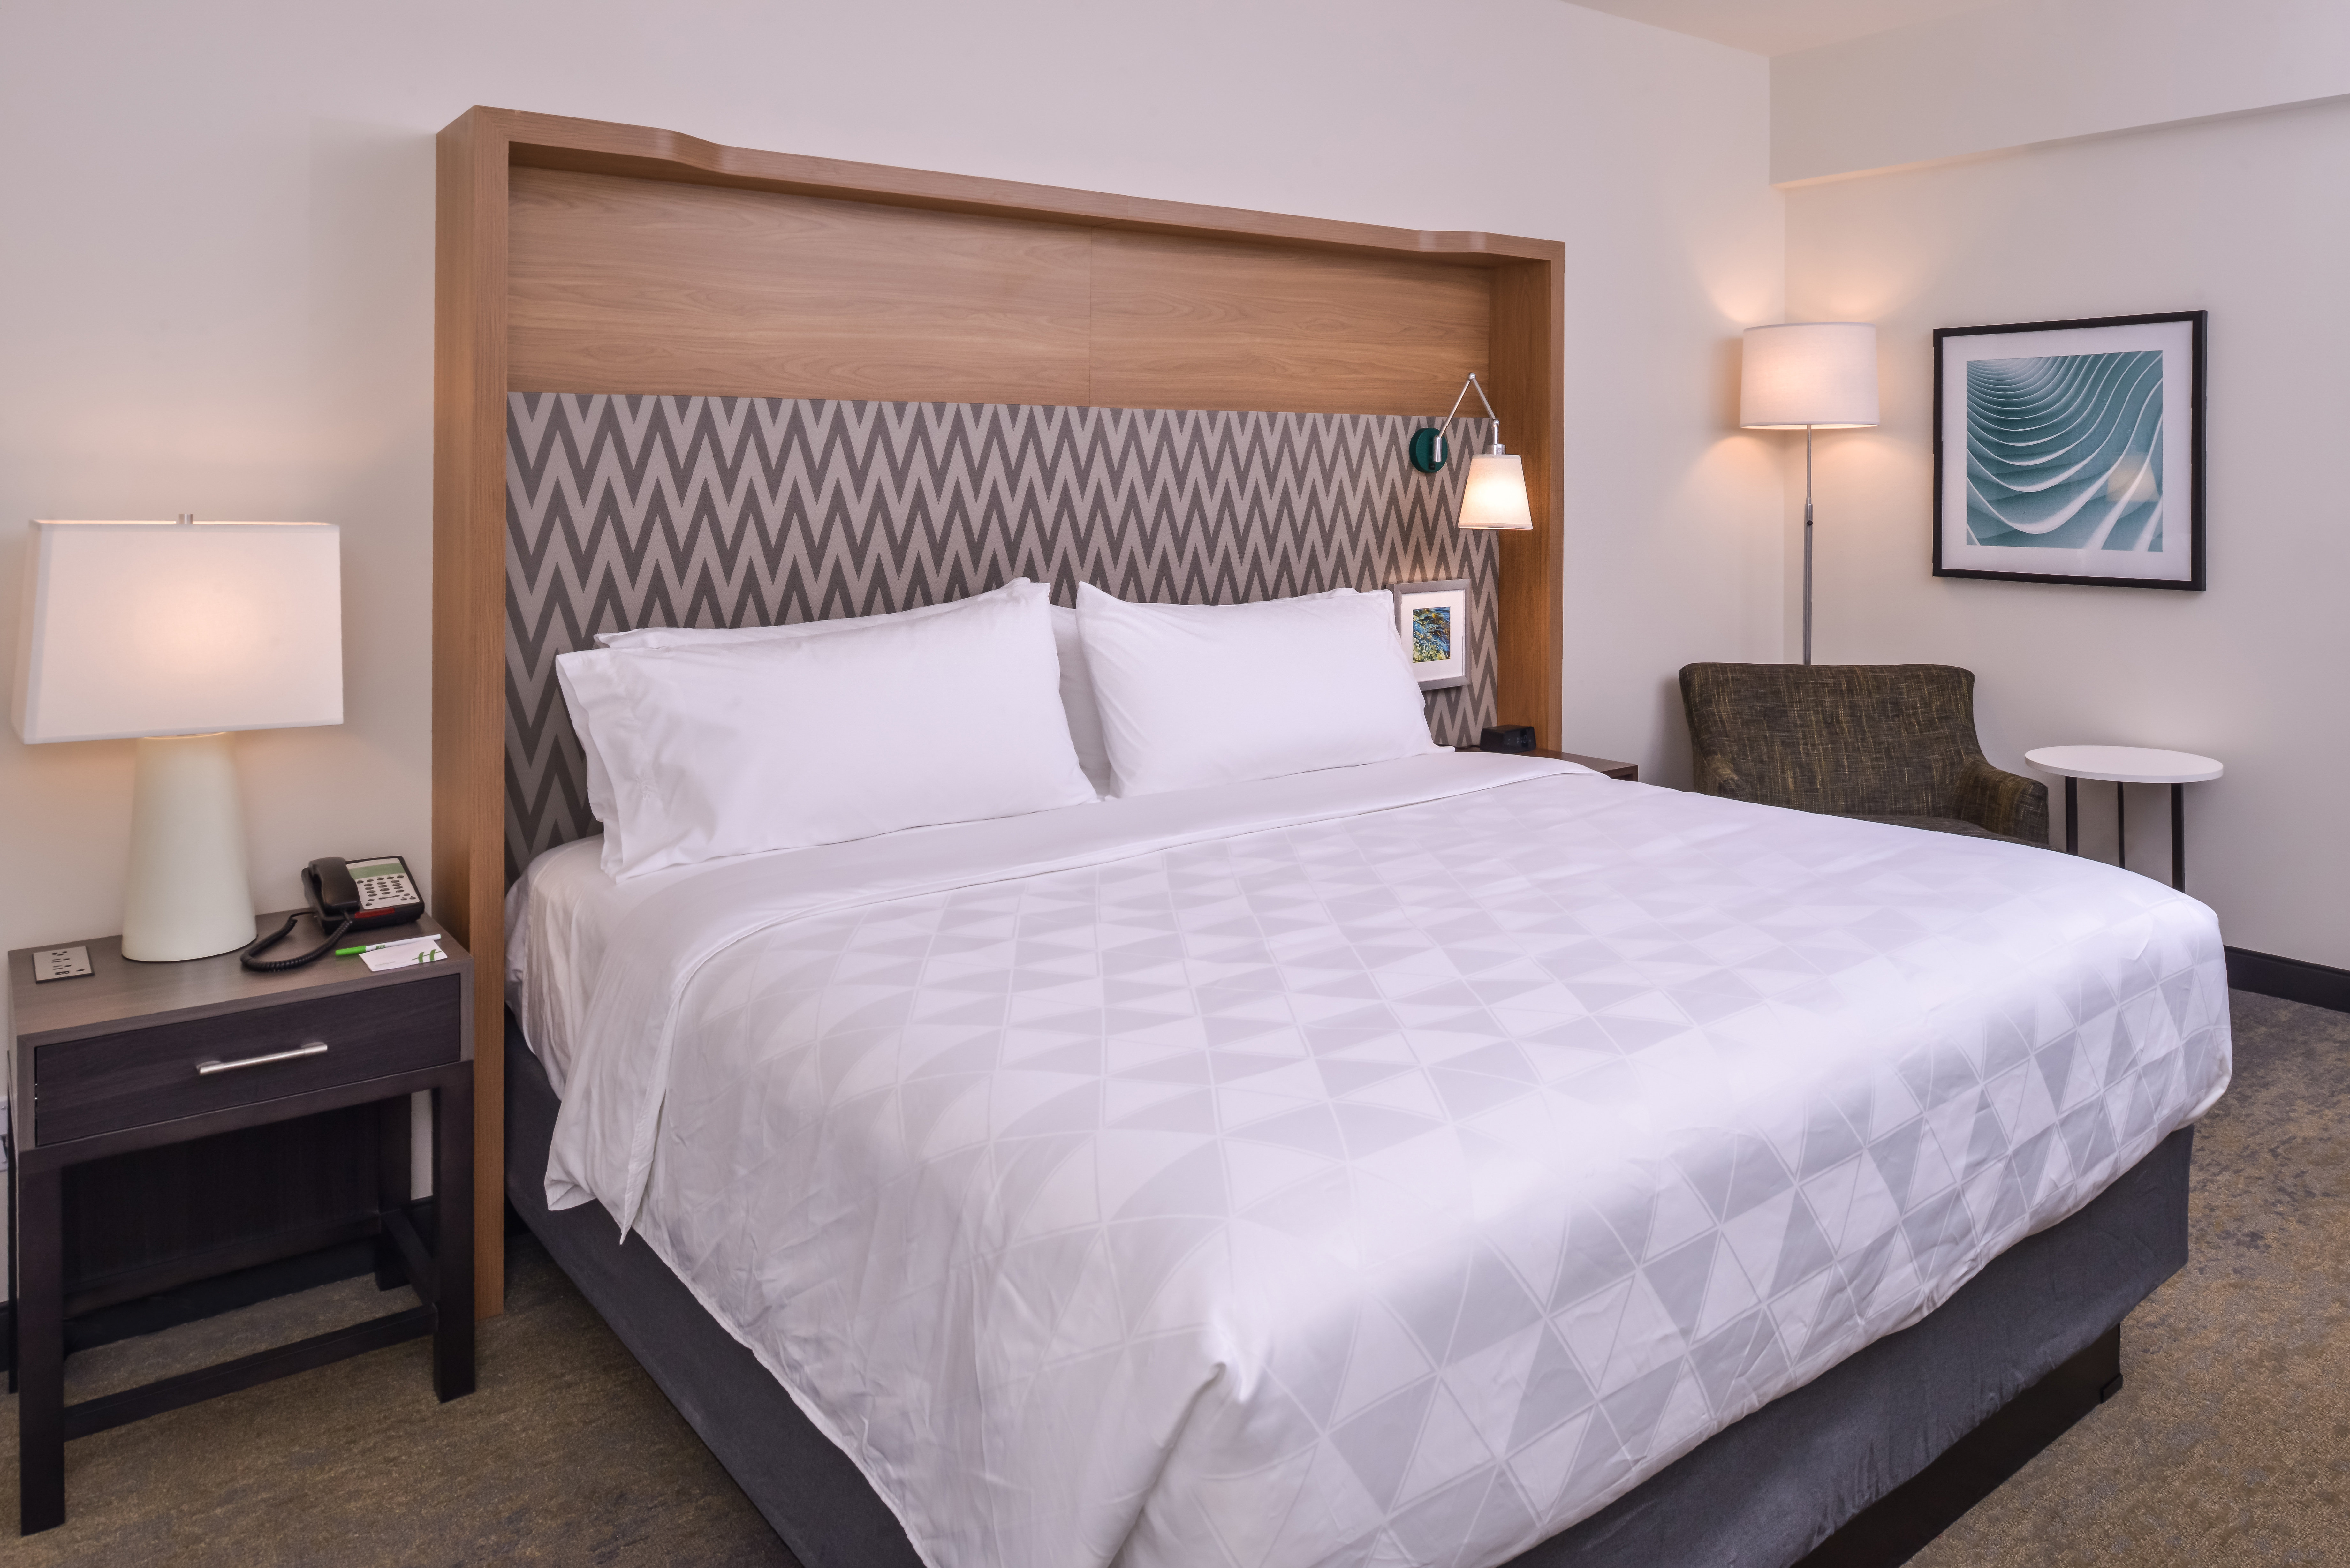 At the end of a long day, relax in our clean, fresh guest rooms.